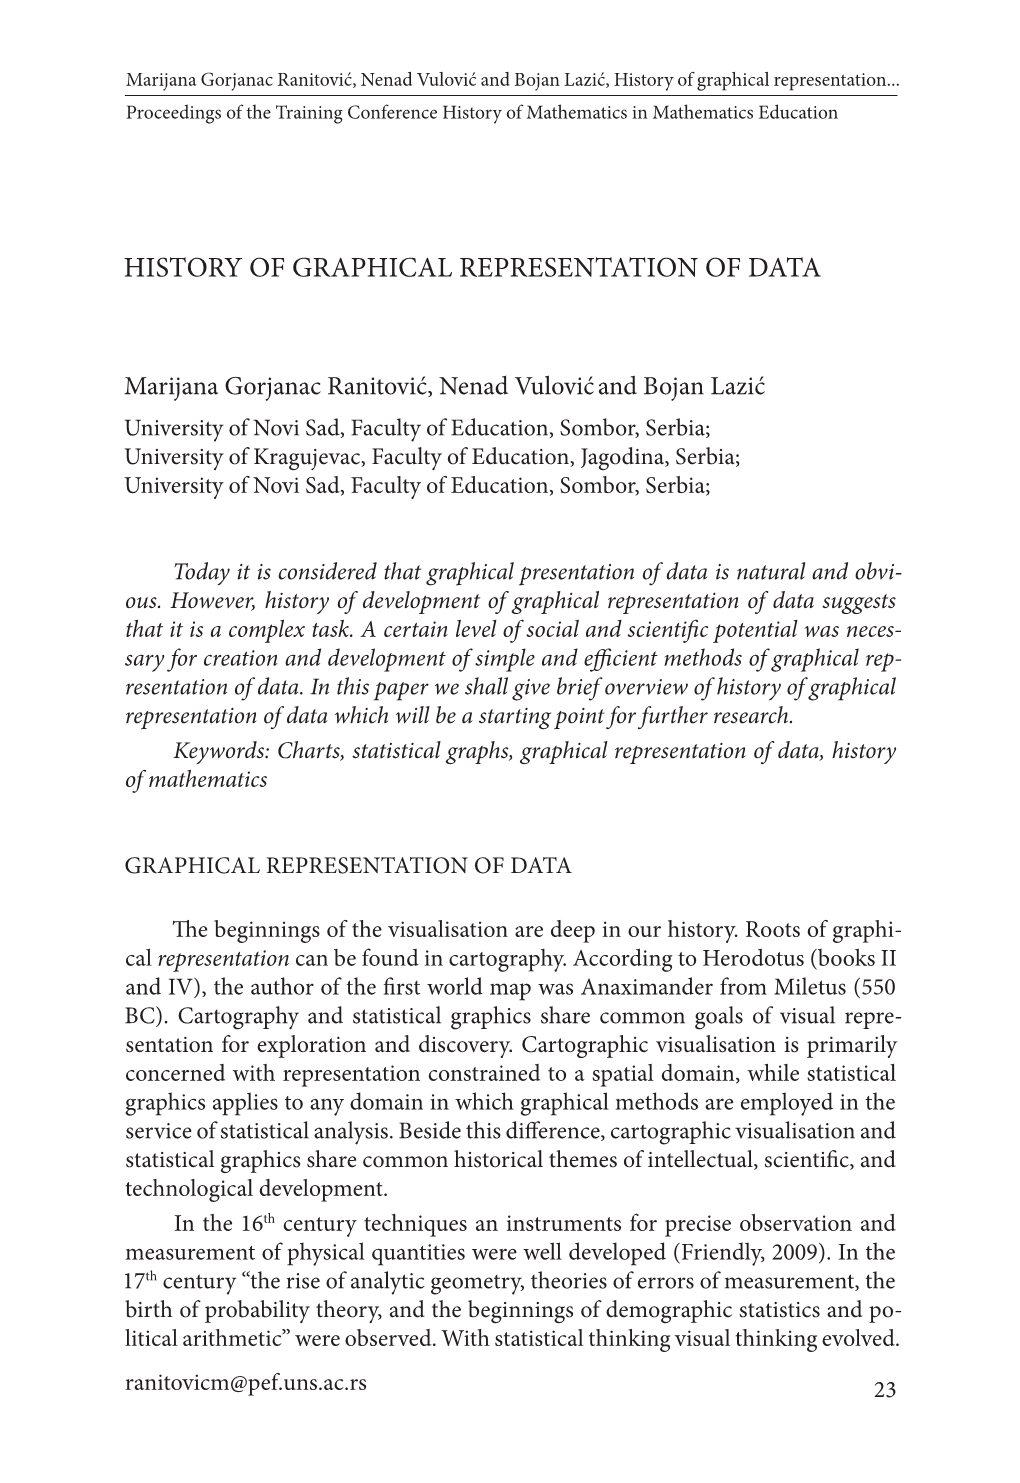 History of Graphical Representation of Data